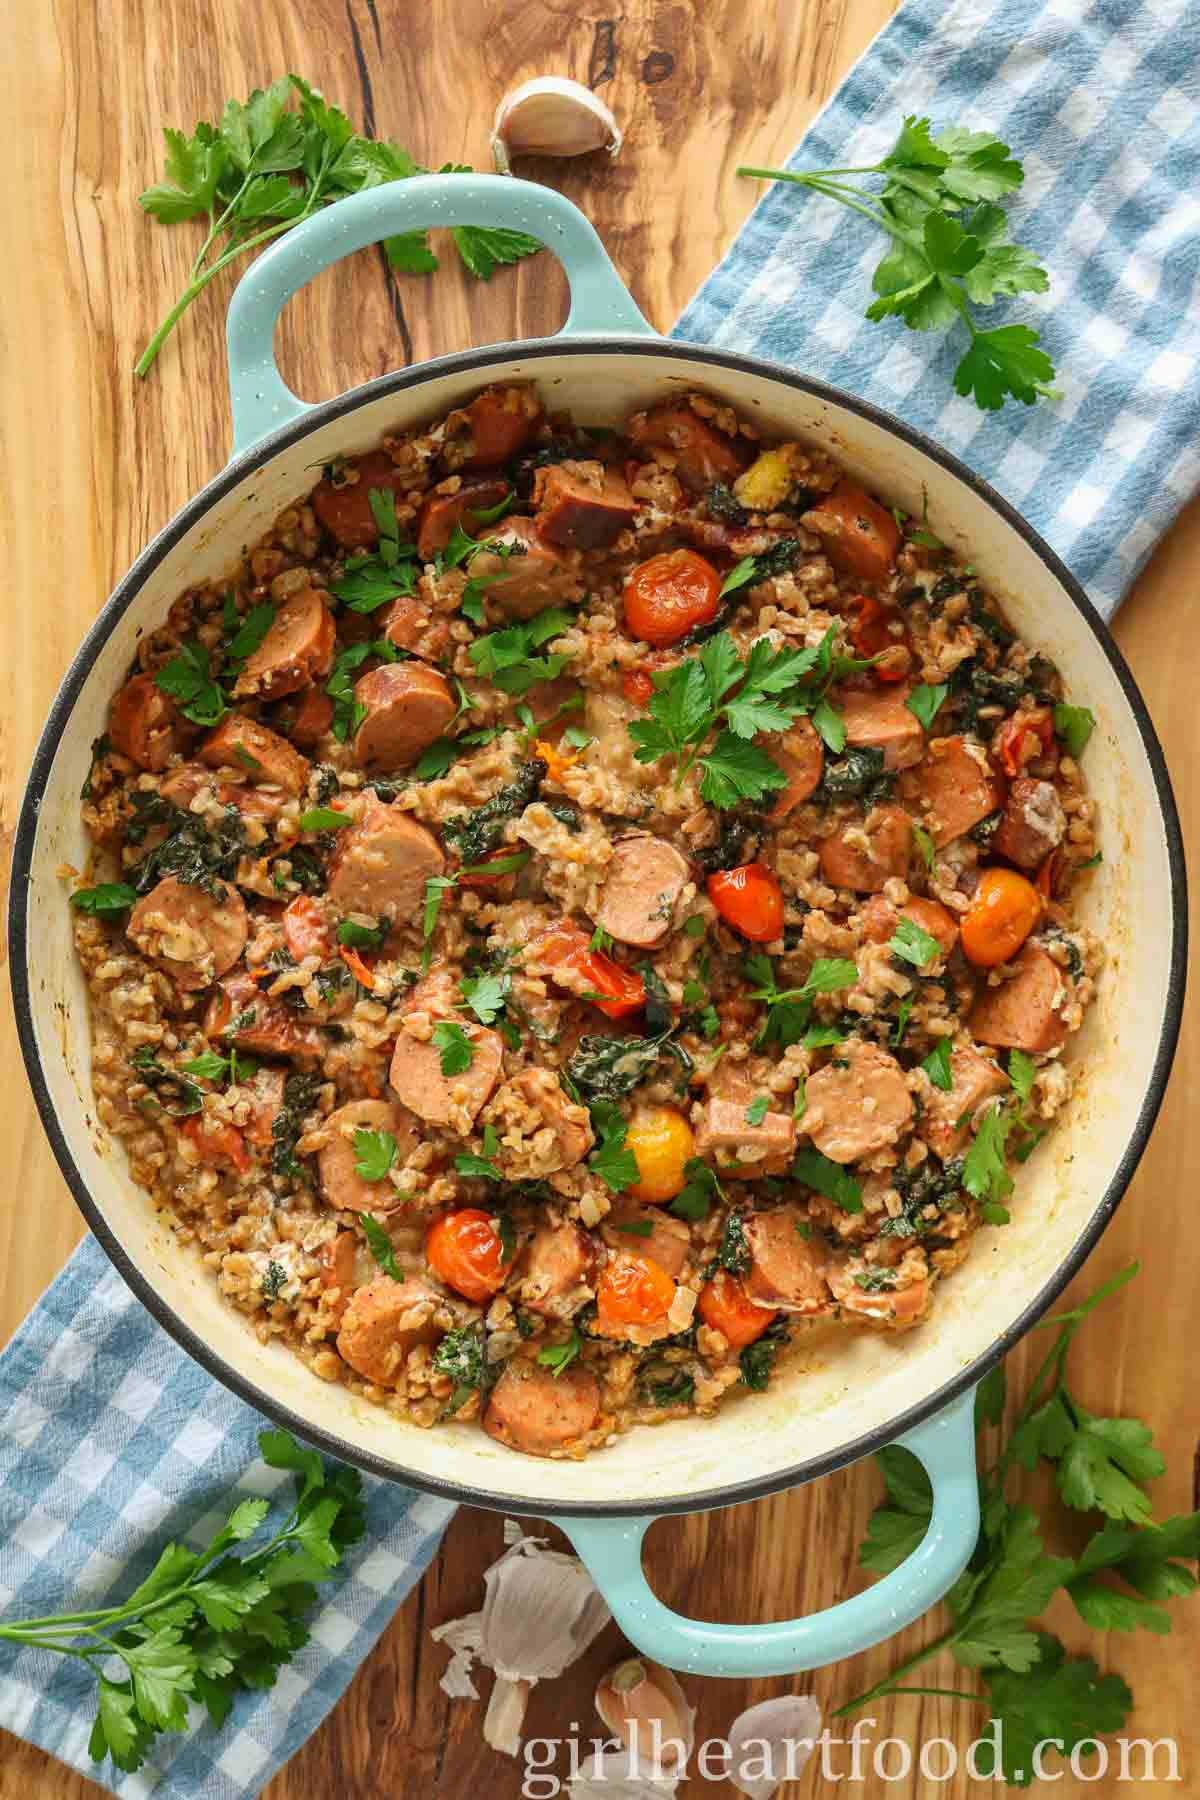 Sausage, farro and vegetables in a pan garnished with fresh parsley.